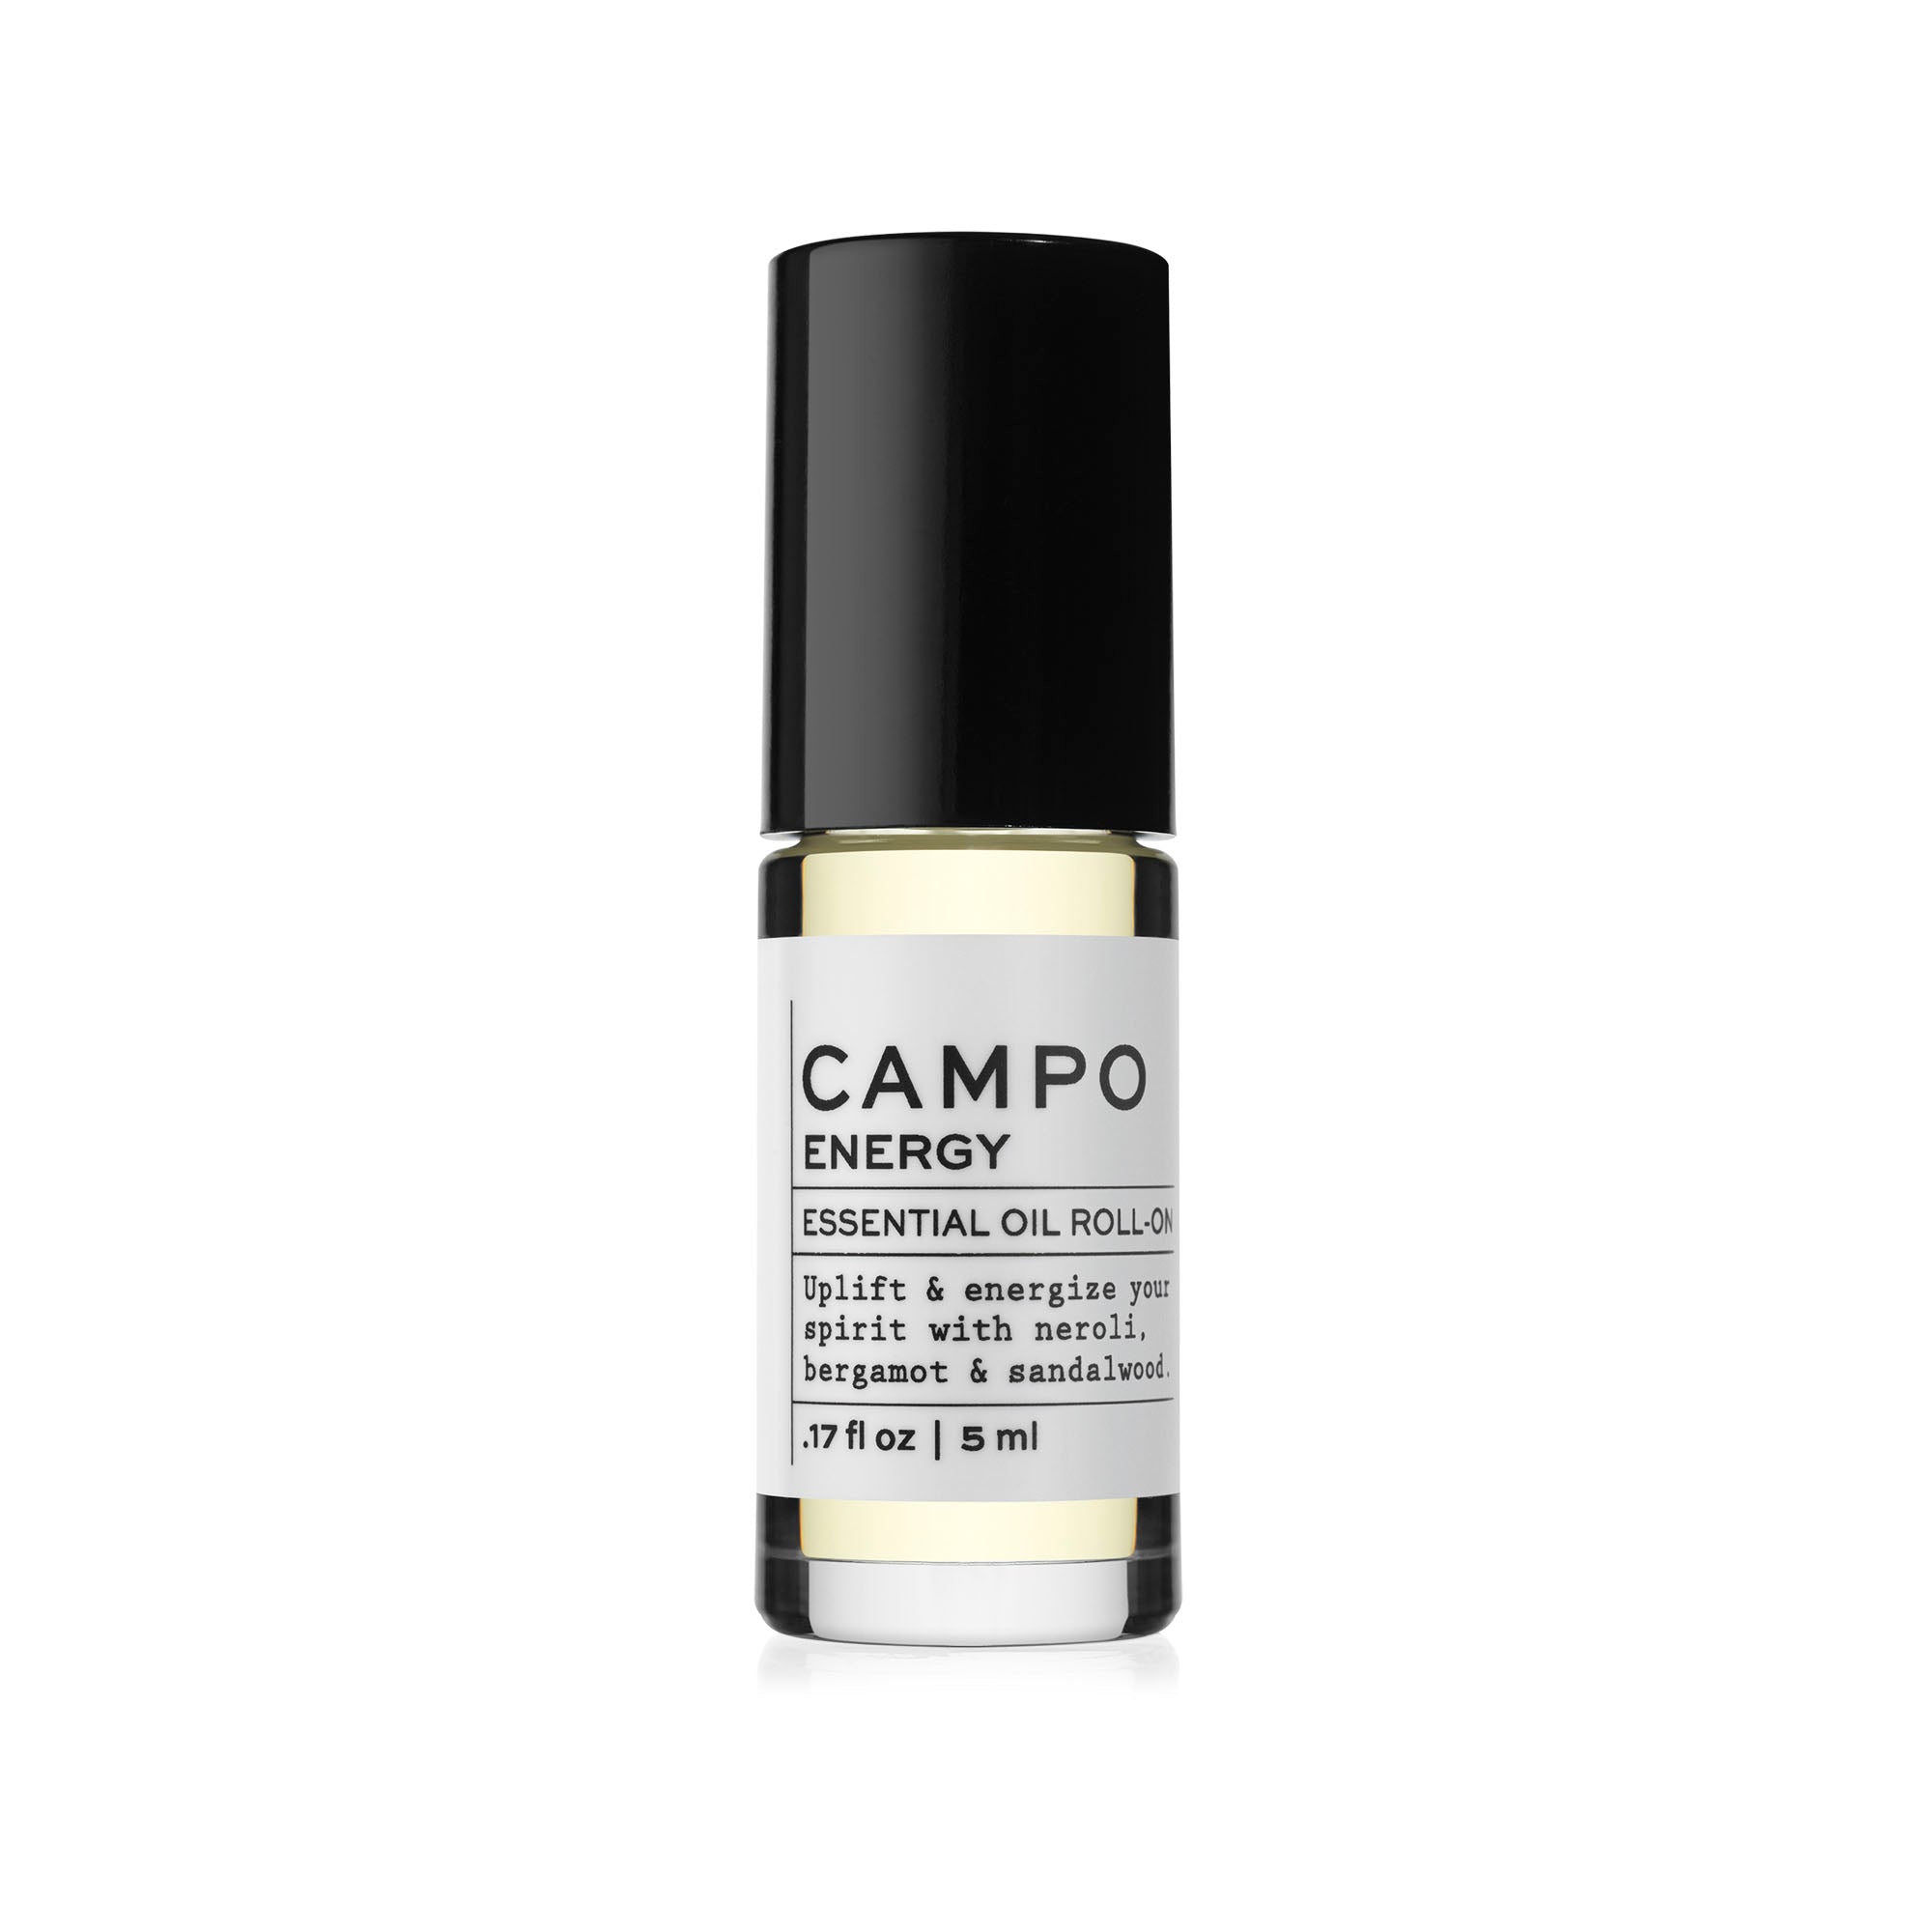 Campo Beauty ENERGY Blend Essential Oil Roll-On in 5 ml. Restores a sense of vitality and alertness. Uplift & energize your spirits naturally with this 100% pure essential oil roll-on blend of Neroli Orange Blossom, Bergamot, Sweet Orange, and Bitter Orange with a hint of Sandalwood. A refreshing and distinctive rich citrus scent with sweet and flowery notes. Pre-blended with 100% natural beauty carrier oils, so it's jet-set and ready to roll!